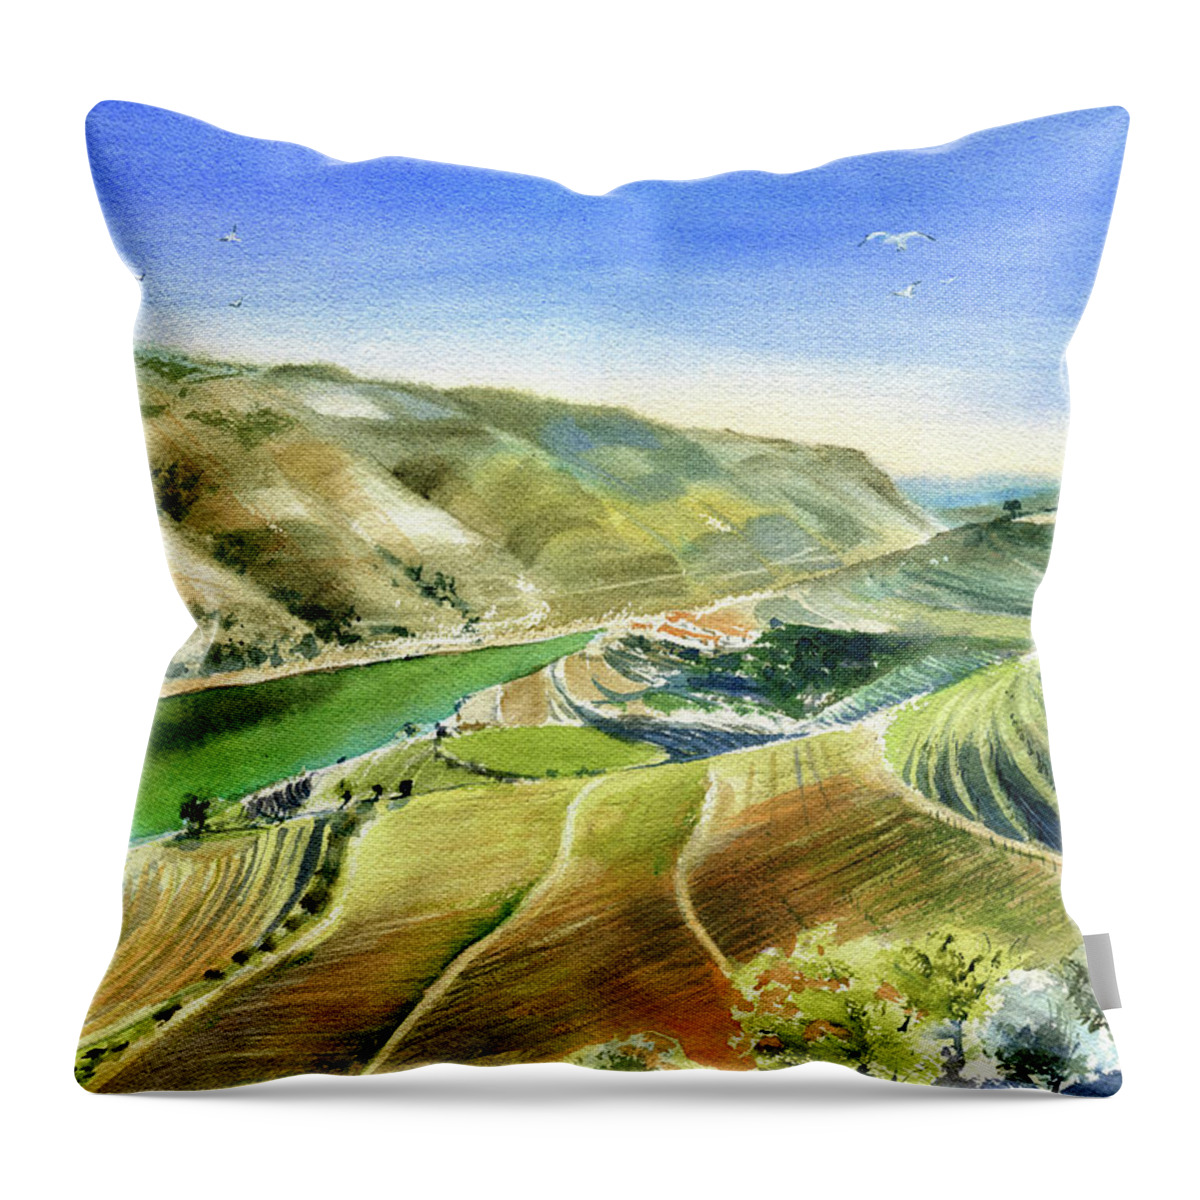 Portugal Throw Pillow featuring the painting Douro Valley Scenery Painting by Dora Hathazi Mendes